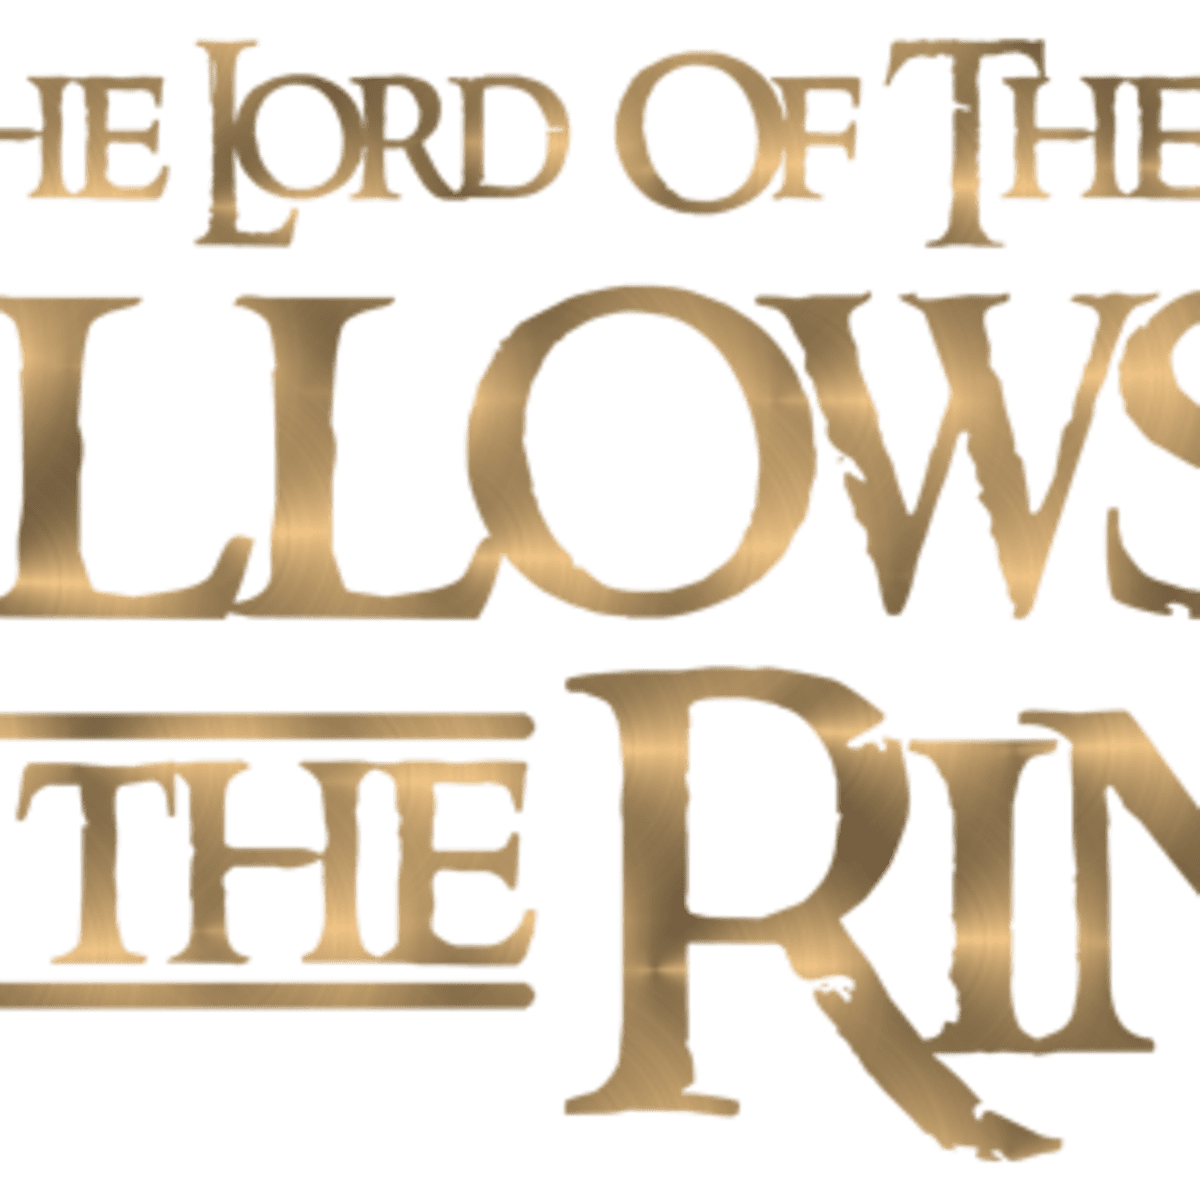 The Fellowship of the Ring: Book vs. Movie – The Trailblazer